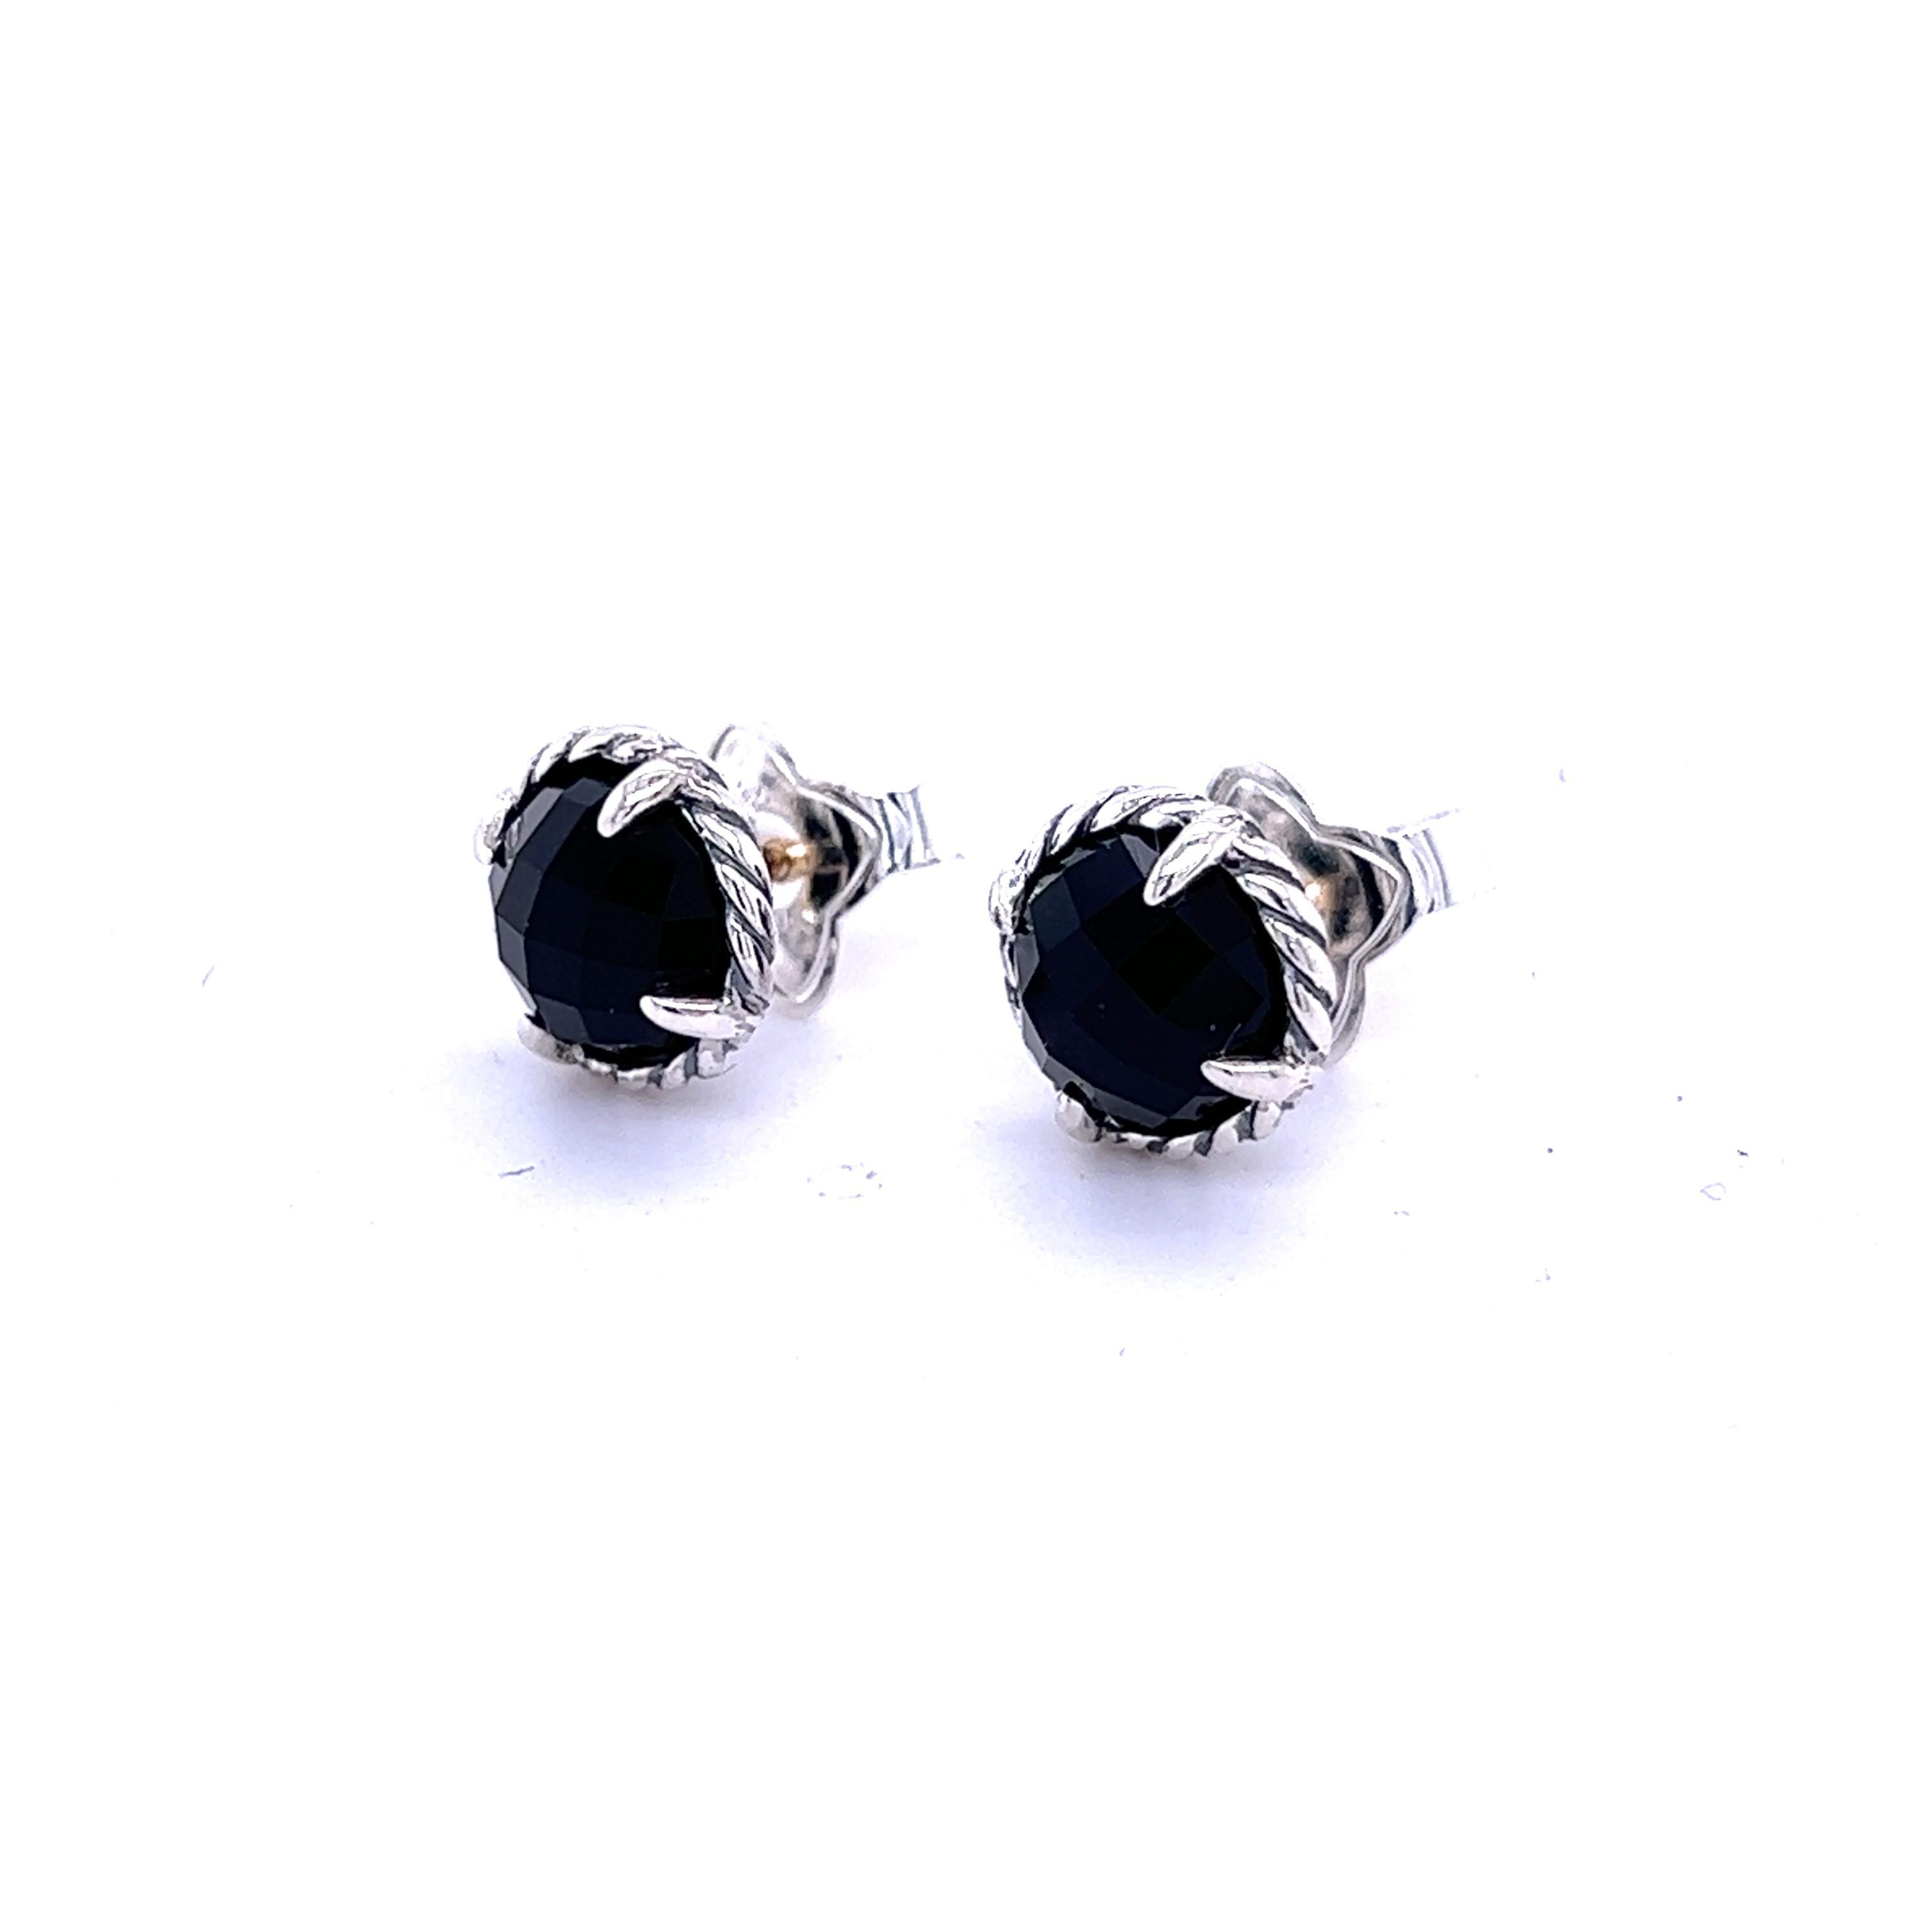 David Yurman Authentic Estate Black Onyx Chantelaine Stud Earrings Silver DY177

Retail: $475.00

TRUSTED SELLER SINCE 2002

PLEASE SEE OUR HUNDREDS OF POSITIVE FEEDBACKS FROM OUR CLIENTS!!

FREE SHIPPING

This elegant Authentic David Yurman Men's